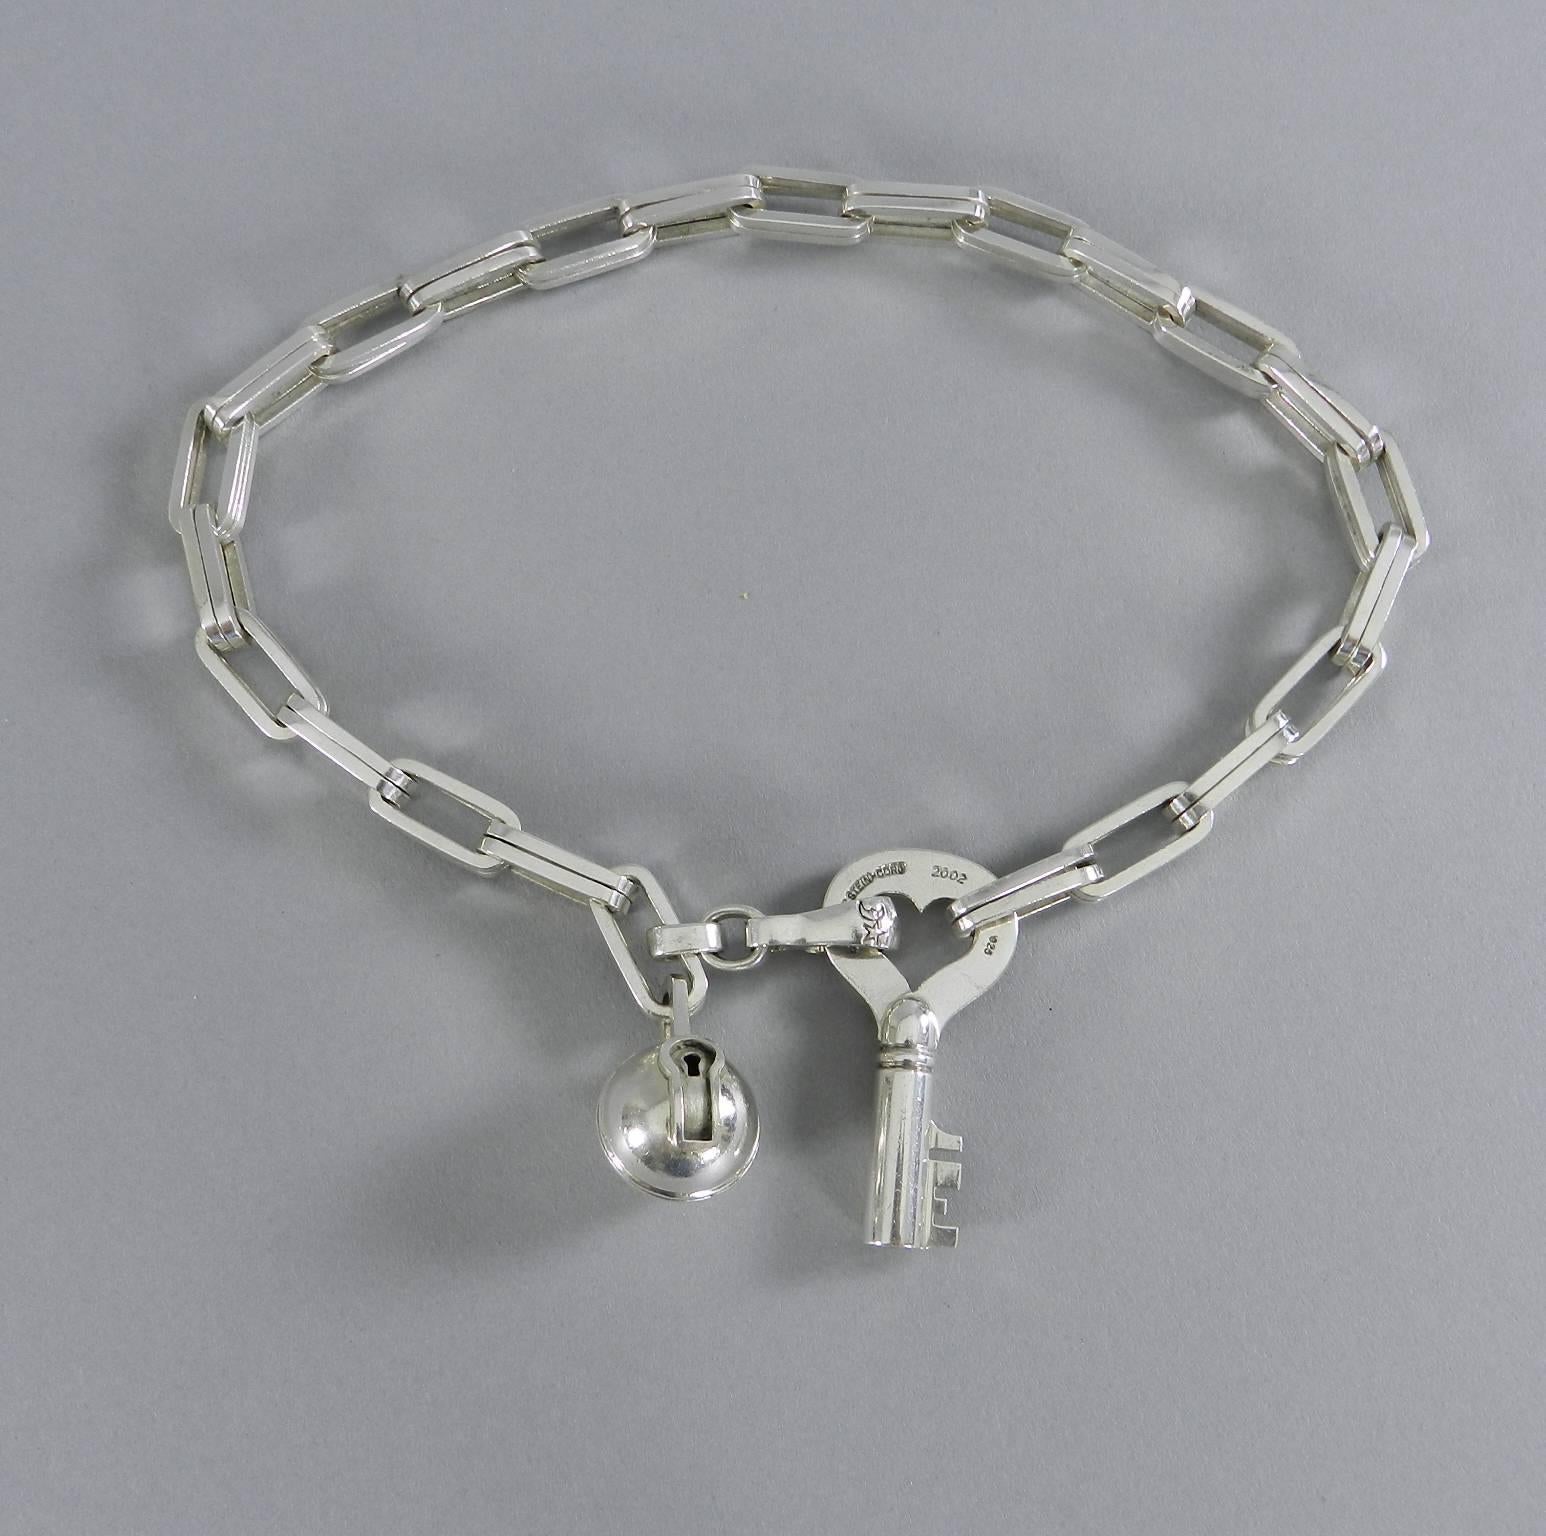 Barry Kieselstein Cord sterling silver necklace. Key and ball lock charms dated 2002. Excellent vintage condition.  14